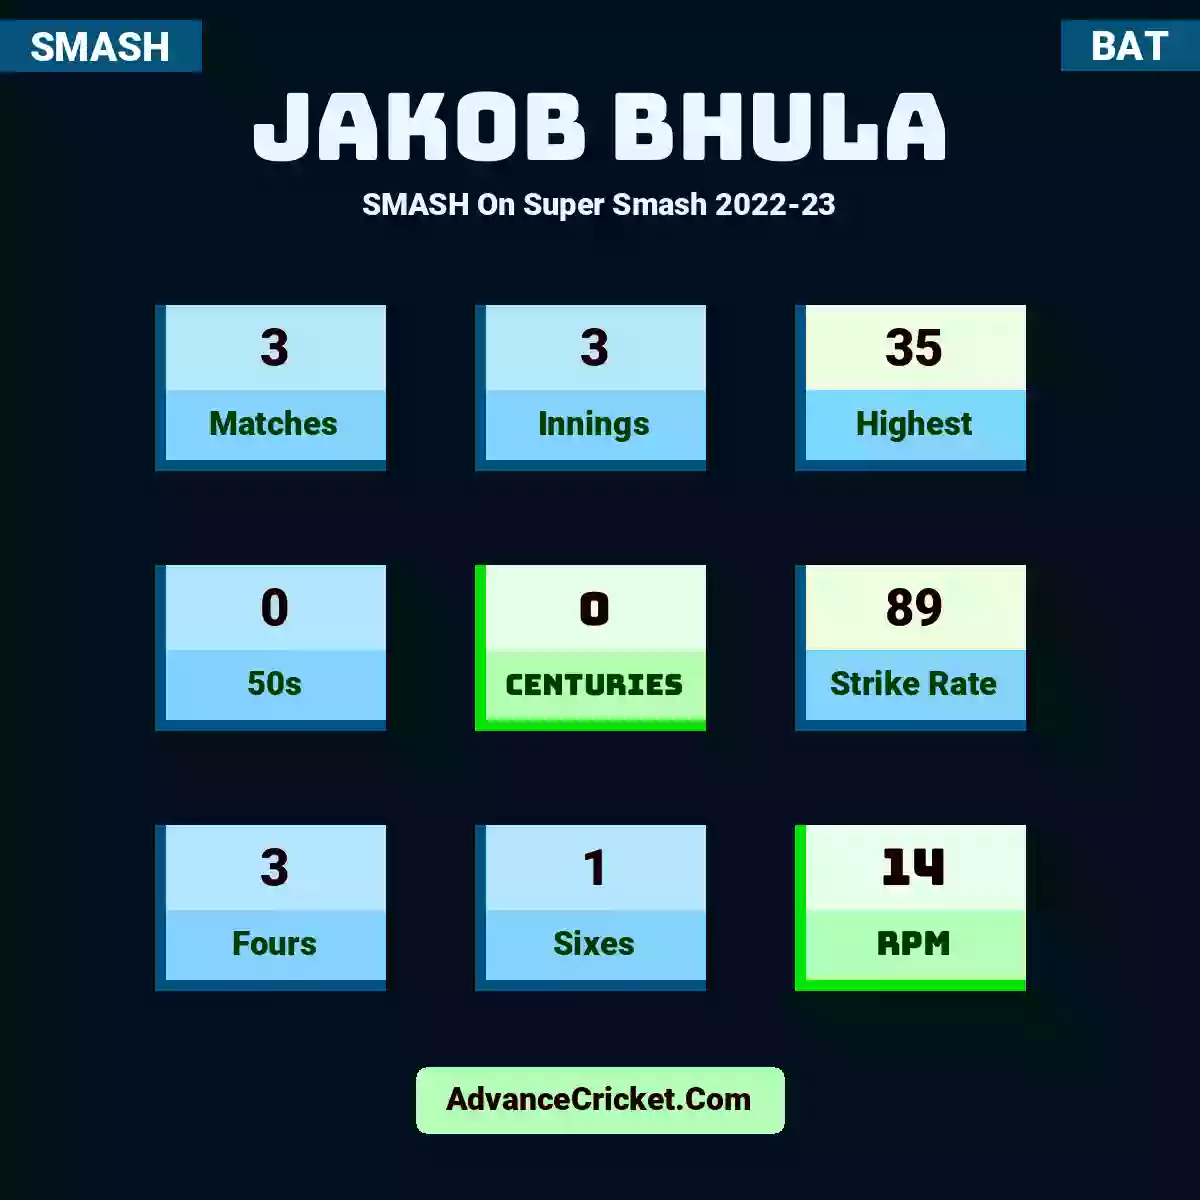 Jakob Bhula SMASH  On Super Smash 2022-23, Jakob Bhula played 3 matches, scored 35 runs as highest, 0 half-centuries, and 0 centuries, with a strike rate of 89. J.Bhula hit 3 fours and 1 sixes, with an RPM of 14.